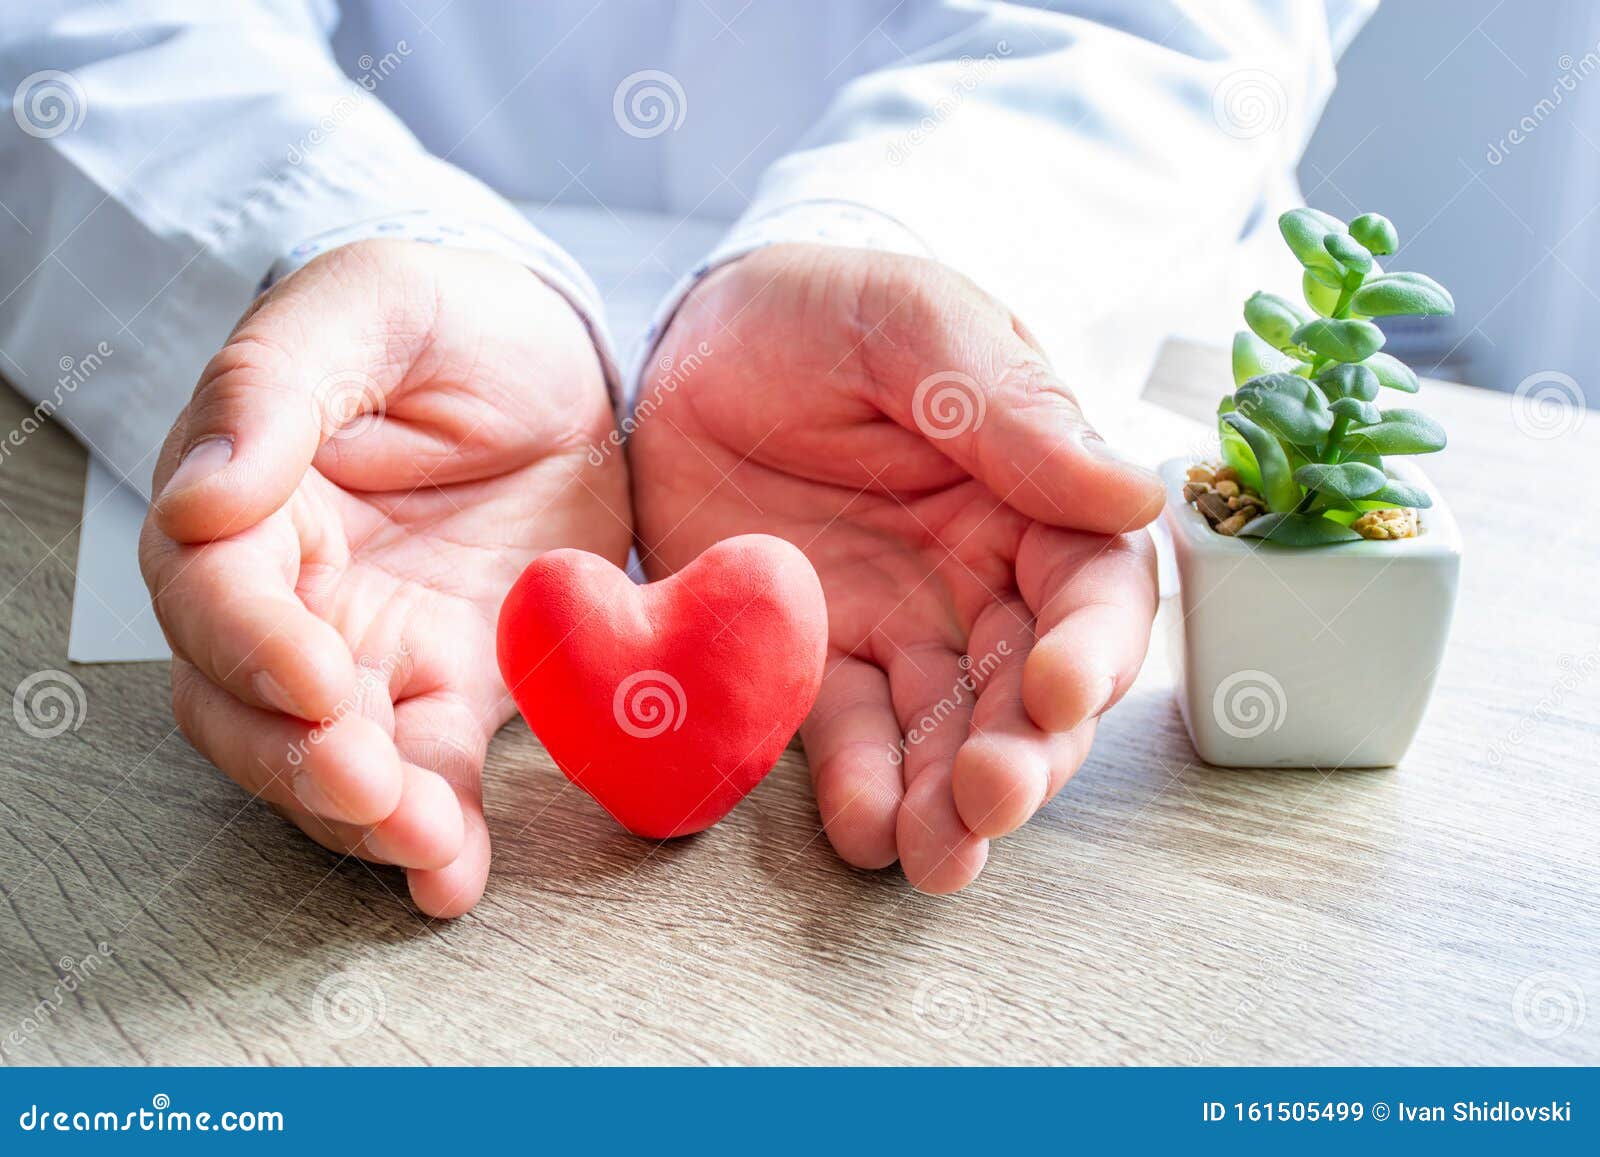 protection, treatment, prevention and patronage health of heart and cardiovascular system against diseases and pathologies concept